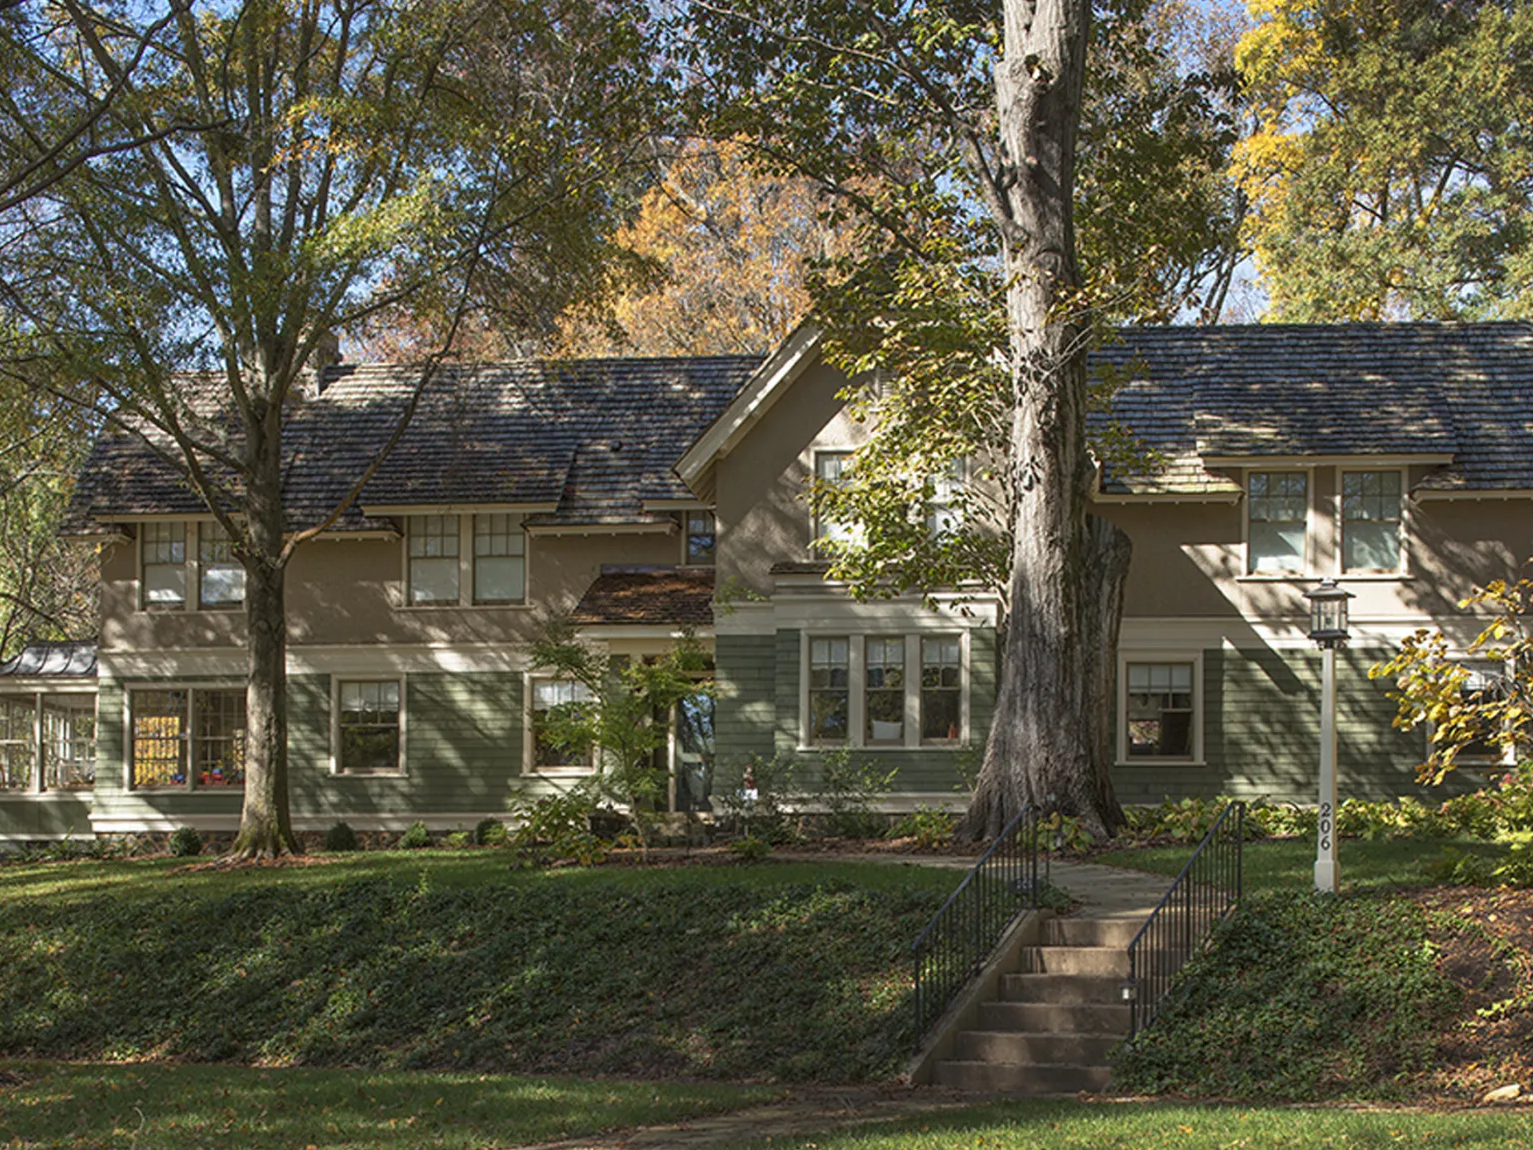 Addition / Renovation to 1923 House